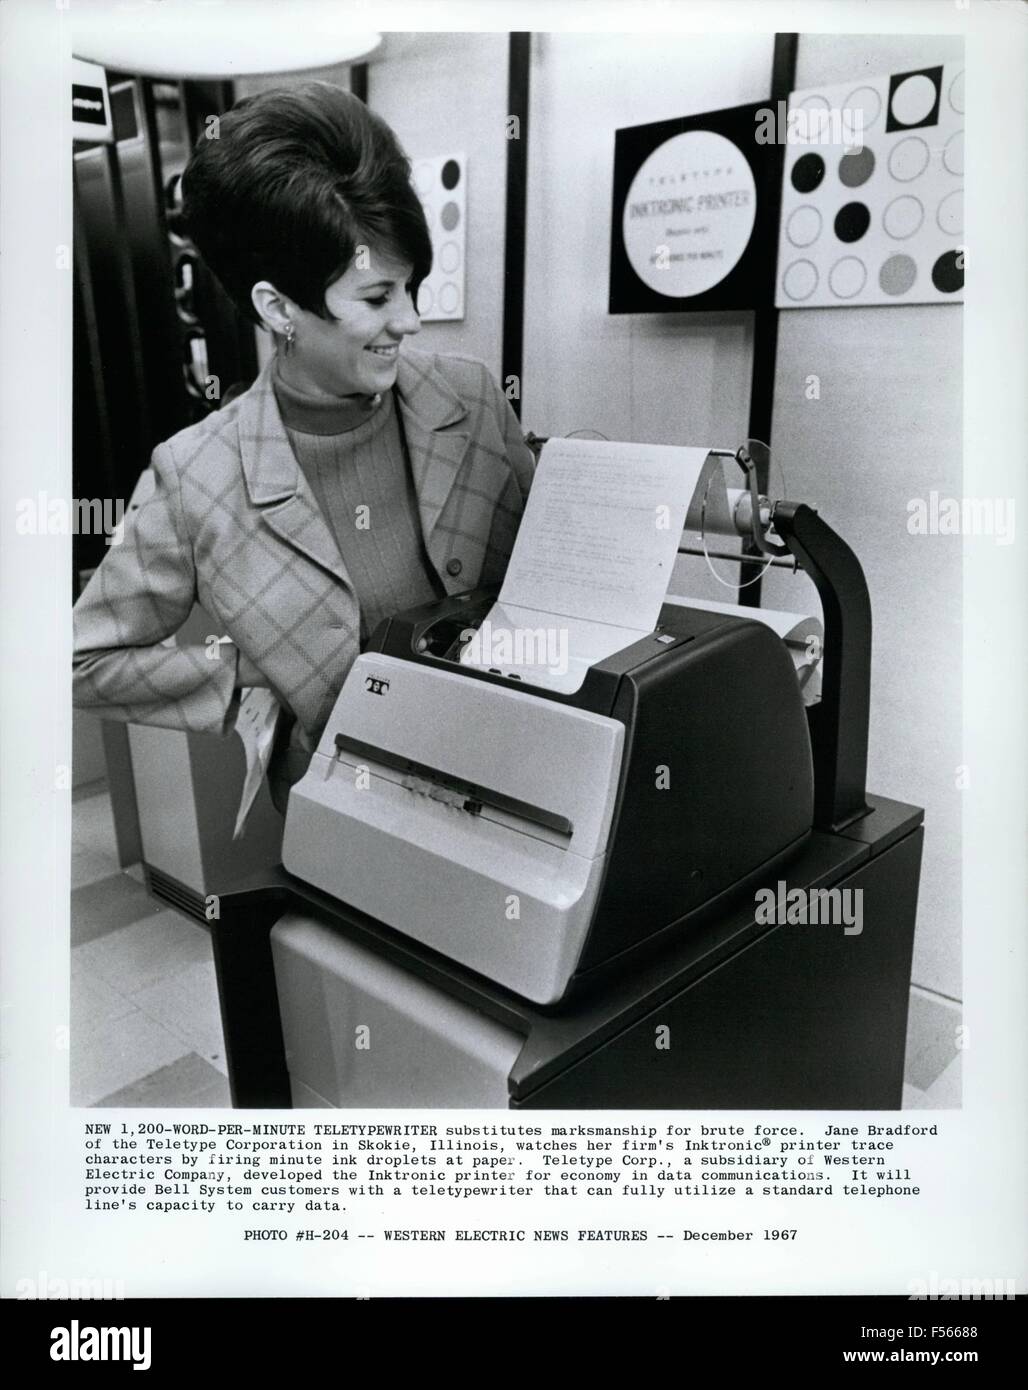 1968 - New 1-200 Word per minute teletypewriter substitutes marksmanship for brute force. Jane Bradford of the teletype corporation in Skokie, Illinois, watches her firm's Inktronic printer trace character by firing minute ink droplets at paper. Teletype Corp., a subsidiary of Western Electric Company, developed the Inktronic printer for economy in data communications. It will provide Bell Systems customers with a teletypewriter that can fully utilize a standard telephone lines capacity to carry data. (Credit Image: © Keystone Pictures USA/ZUMAPRESS.com) Stock Photo